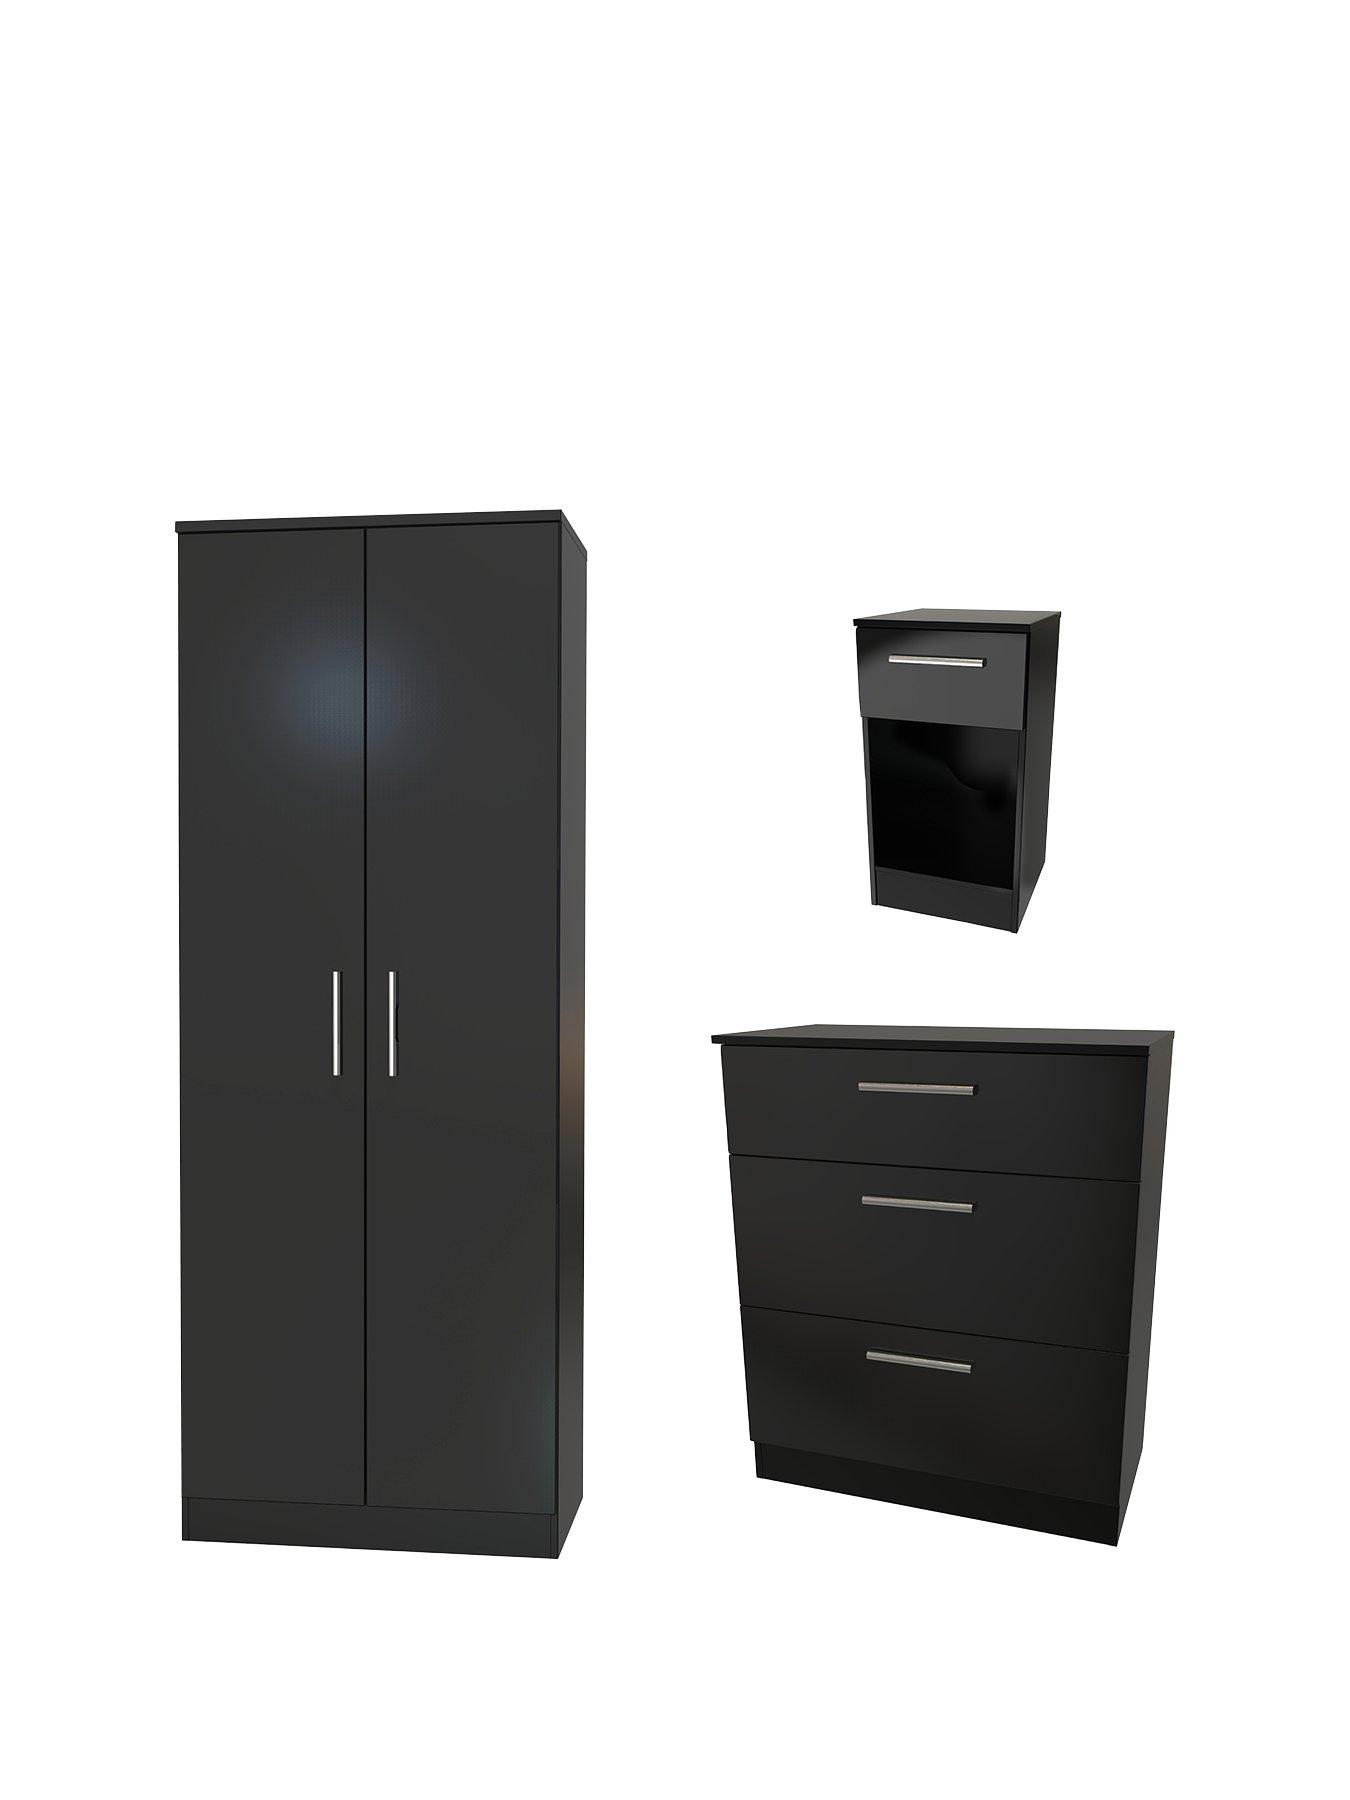 Swift Montreal Gloss 3 Piece Ready Assembled Package  2 Door Wardrobe, 3 Drawer Chest And 1 Drawer Bedside Table - Black